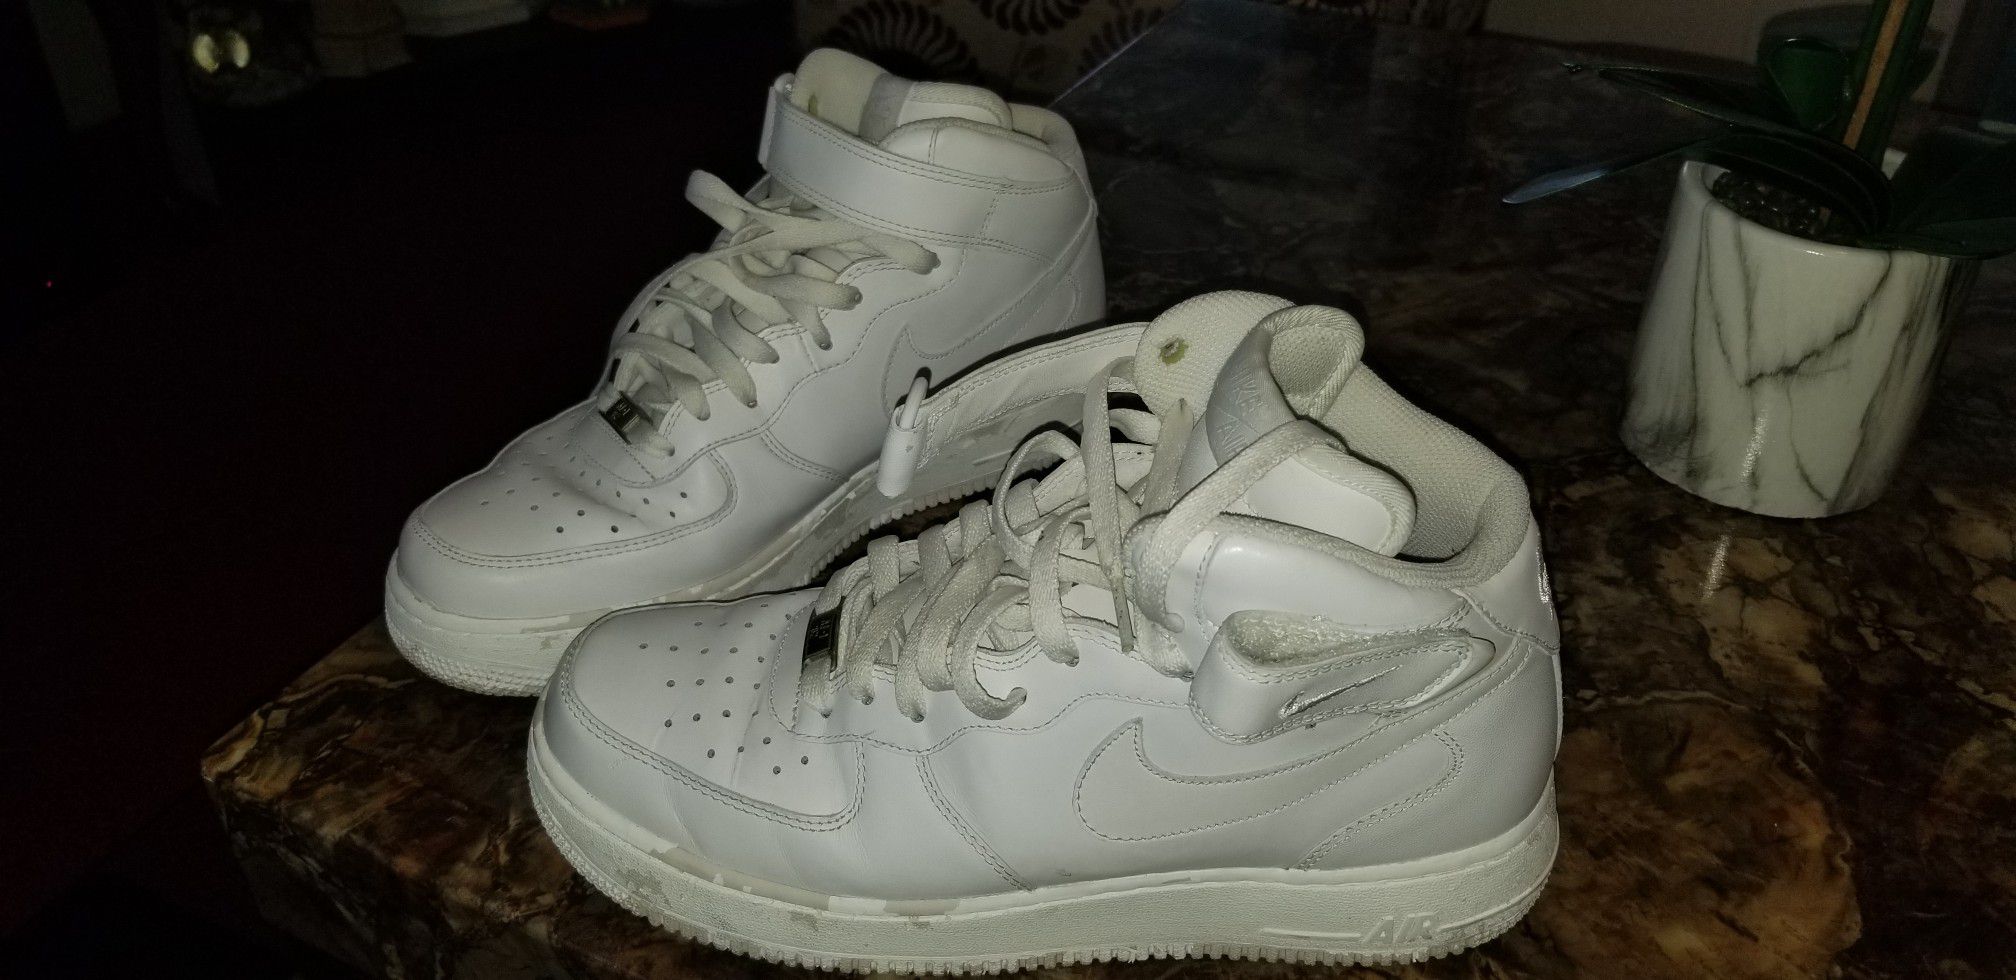 Nike shoes size 9 used but in great condition